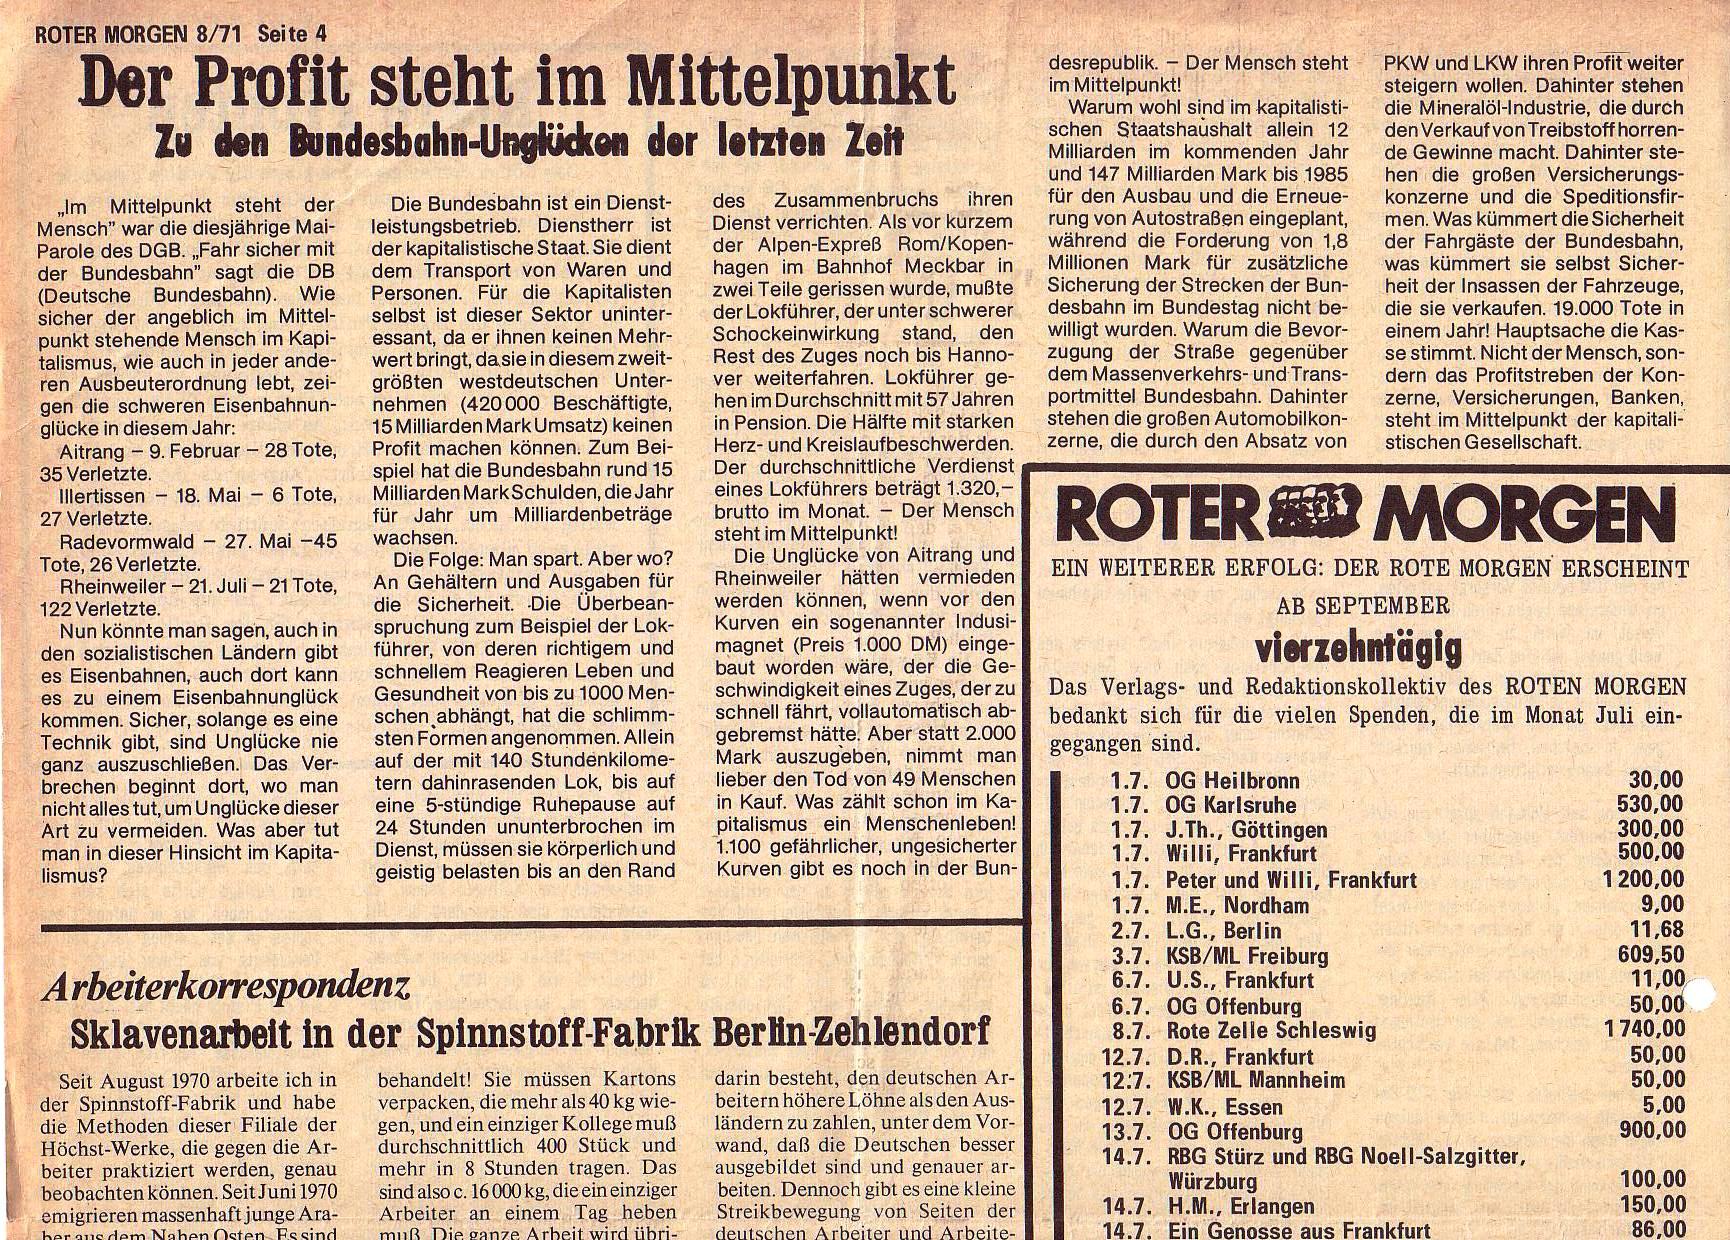 Roter Morgen, 5. Jg., August 1971, Nr. 8, Seite 4a